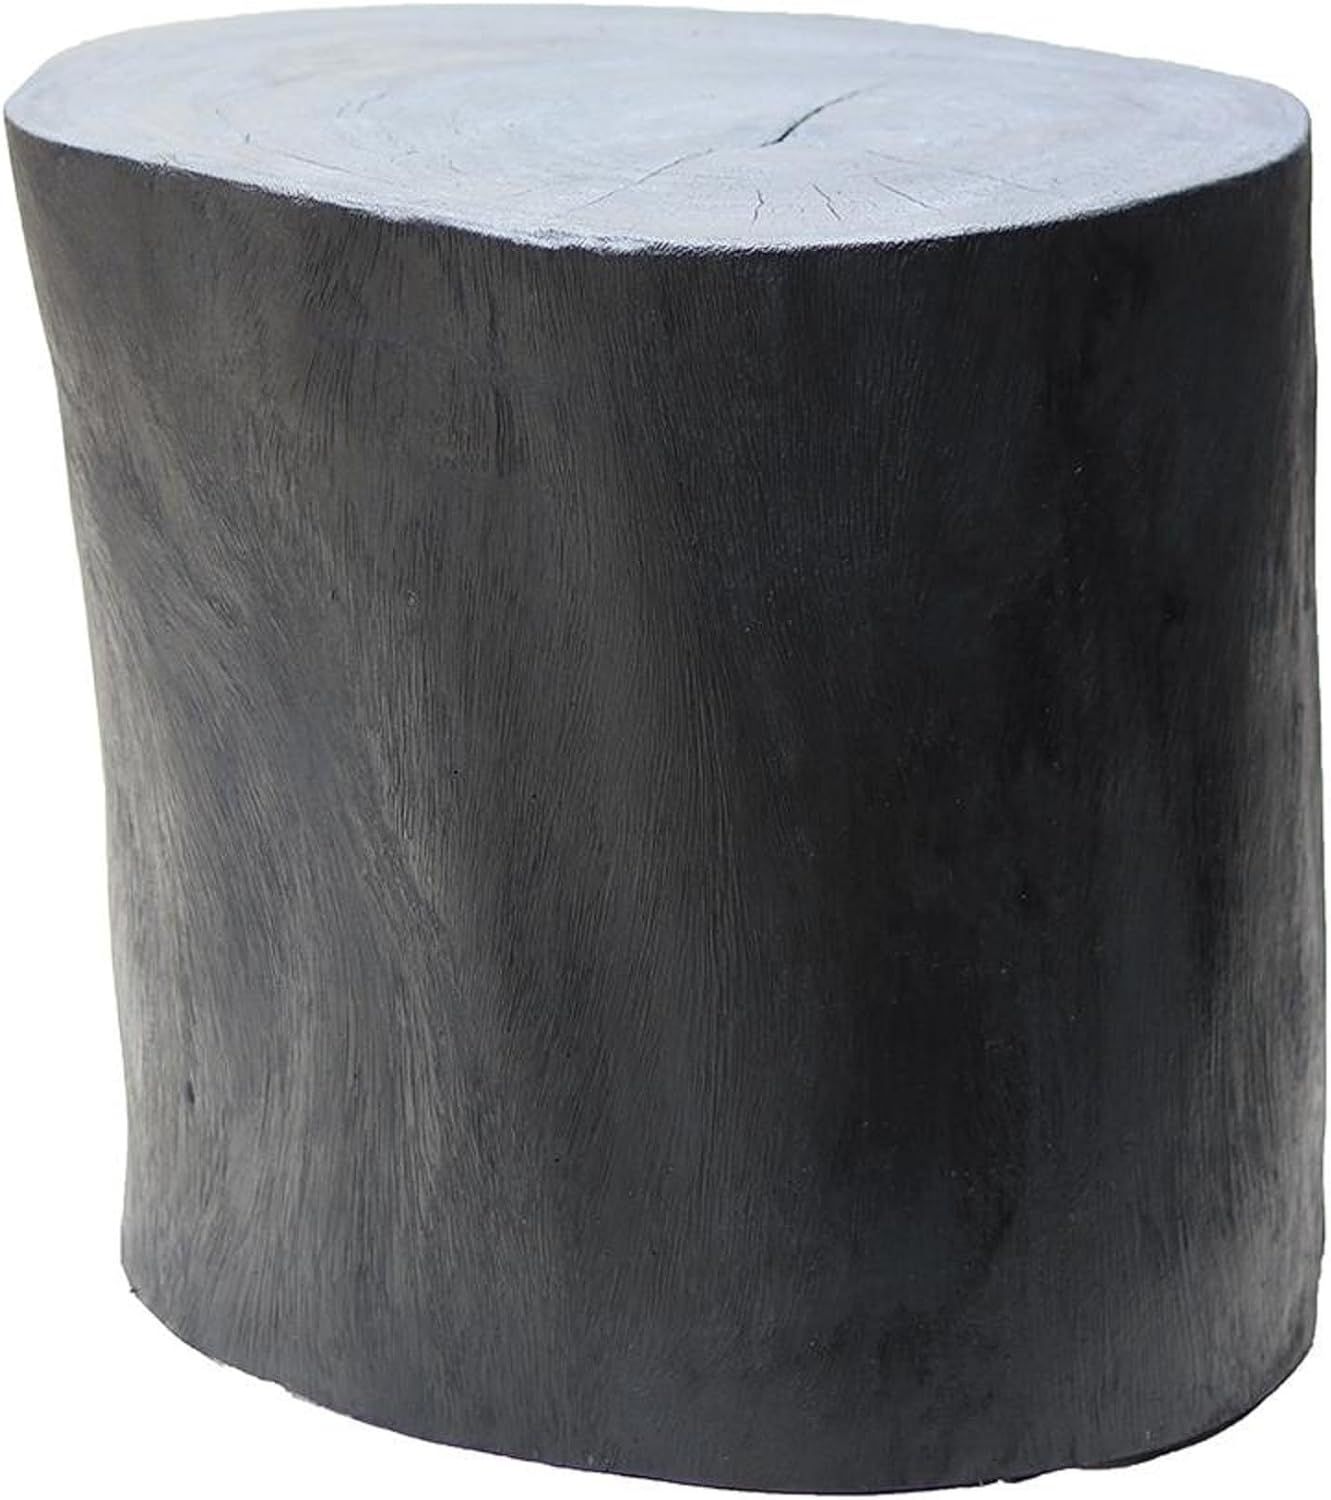 A & B Home 19.7 in W Round Matte Black Suar Wood Side Table, Bedside Living Room Entryway Accent | Amazon (US)